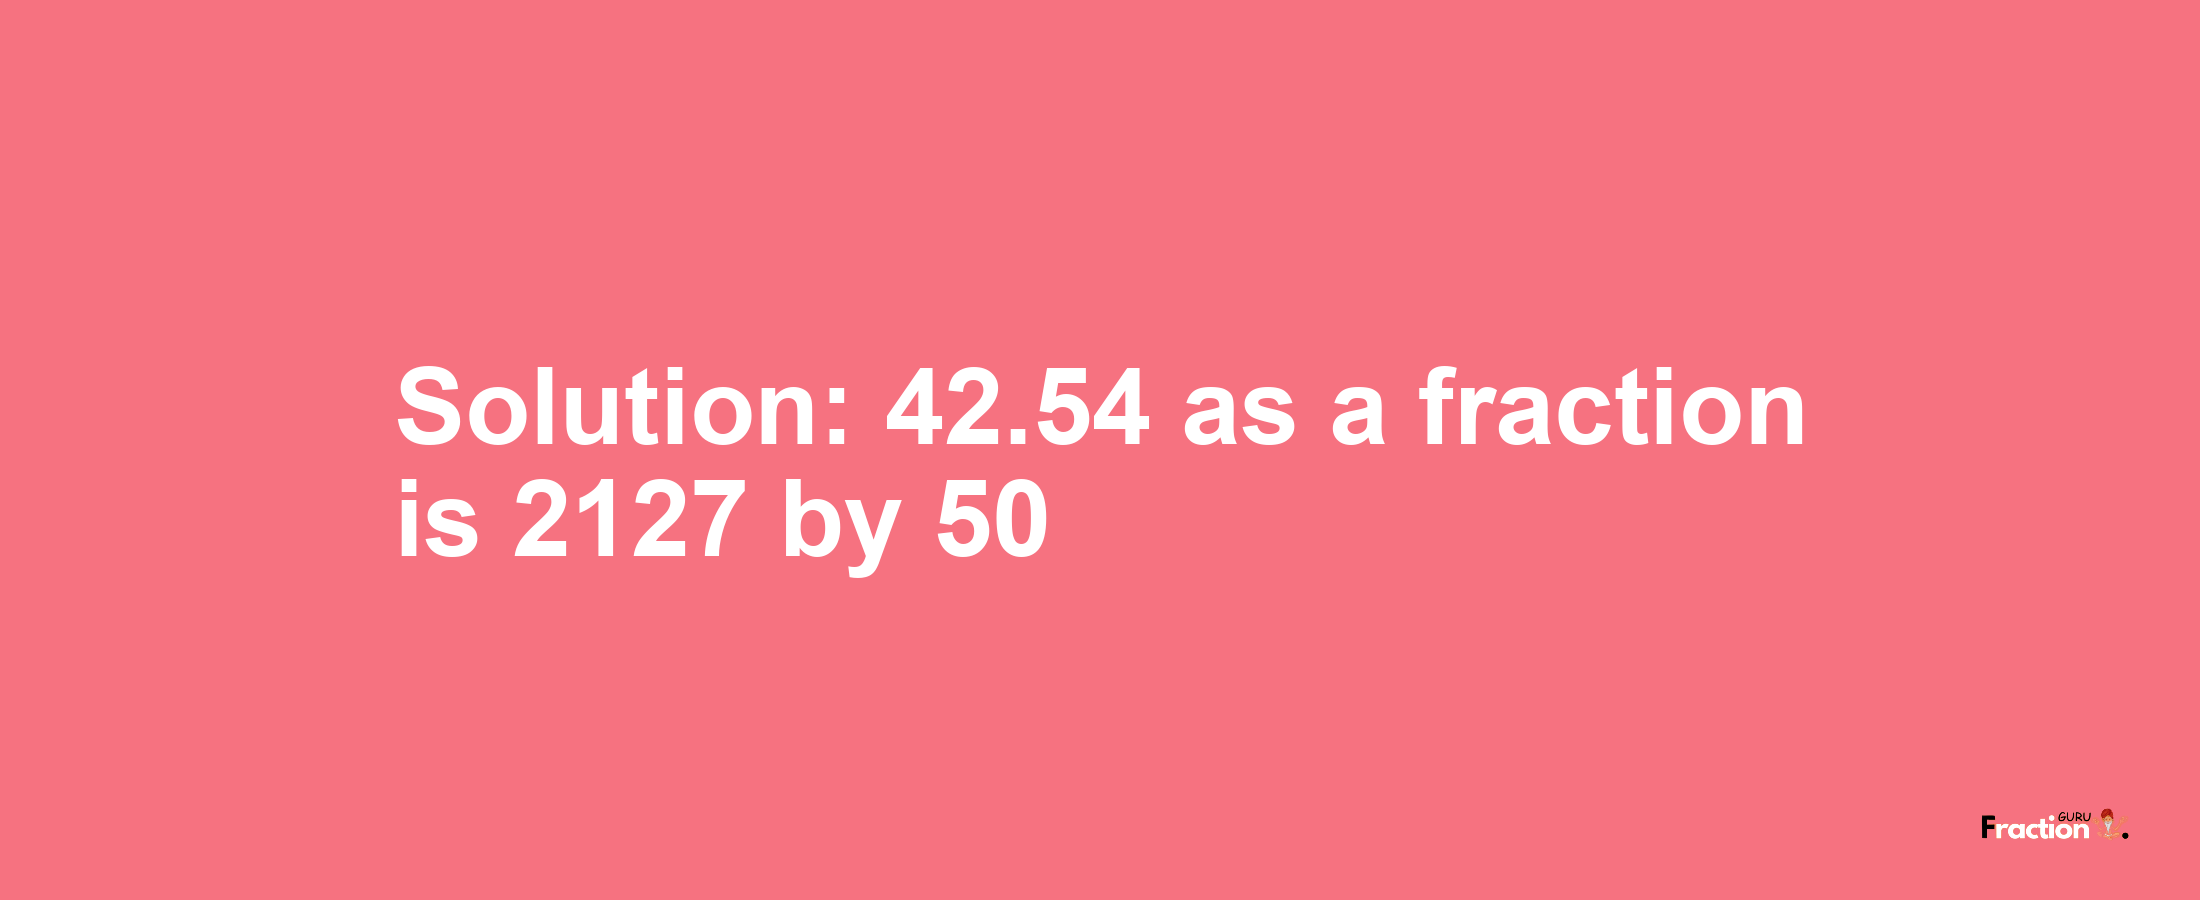 Solution:42.54 as a fraction is 2127/50